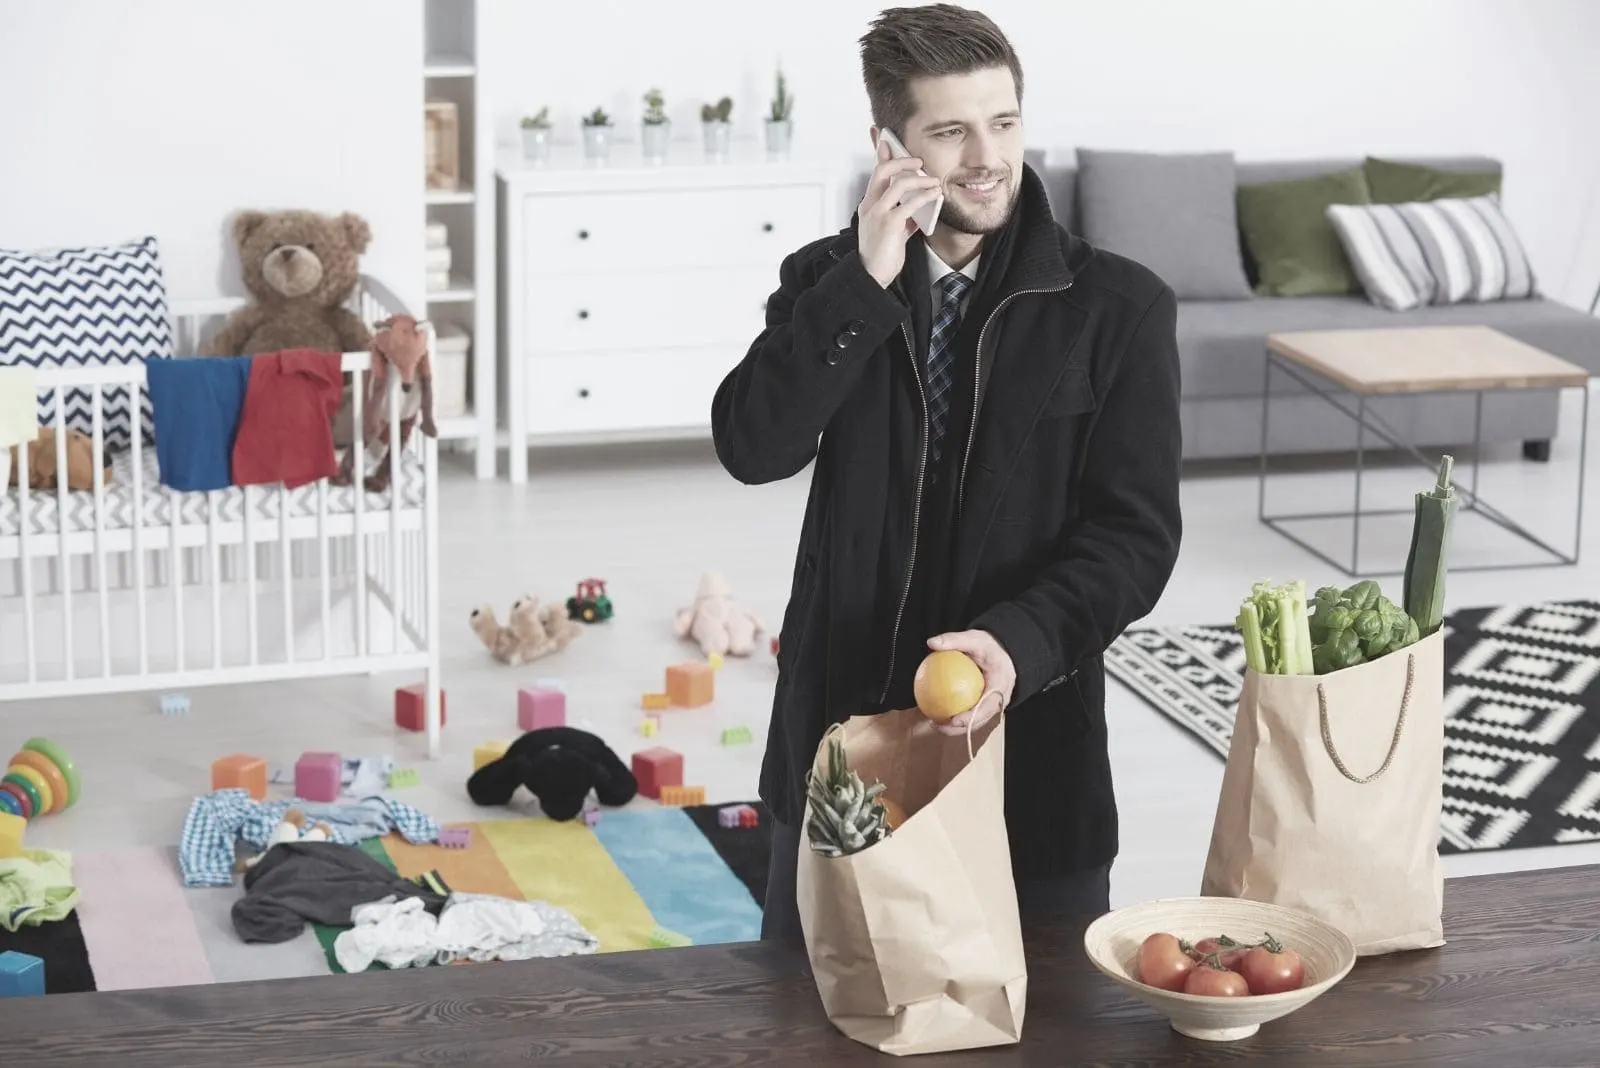 man putting down groceries on the dining table while answering a phone call